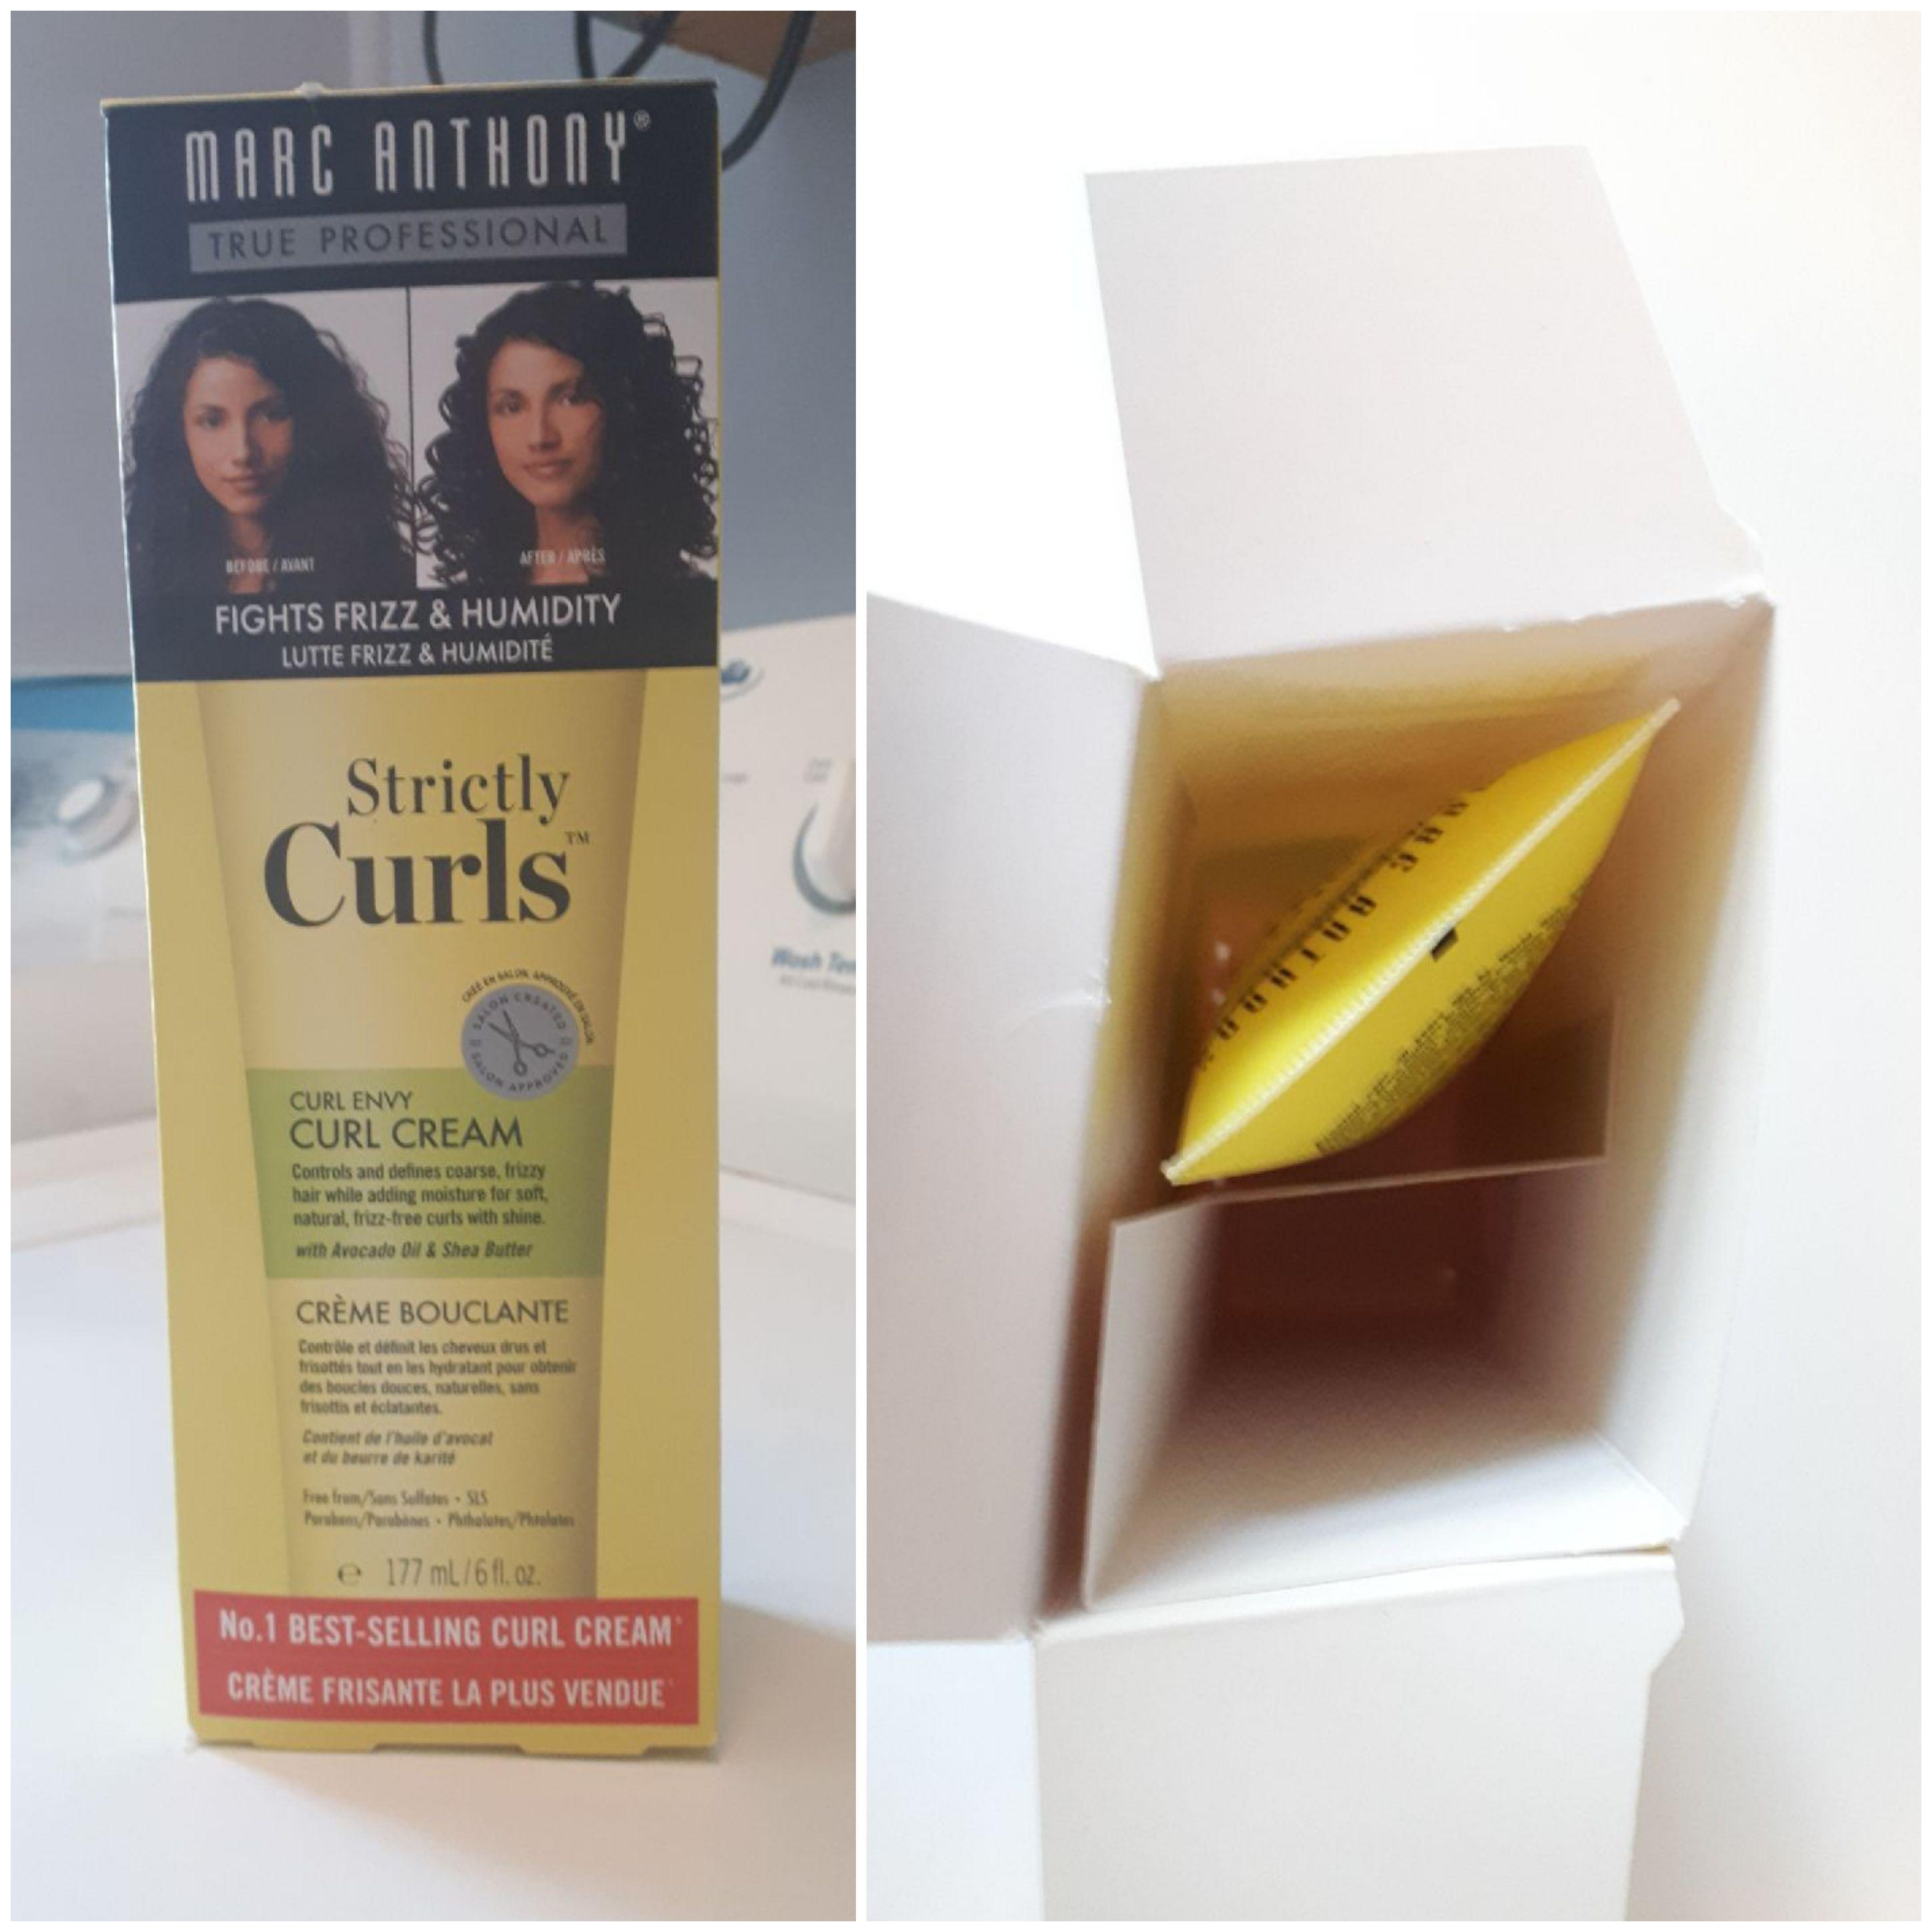 box - Marc Anthony True Professional Before Ayan After Aprs Fights Frizz & Humidity Lutte Frizz & Humidit Strictly Curls Creen Curl Envy Curl Cream Controls and defines coarse, frizzy hair while adding moisture for soft natural, frizztree curts with shine